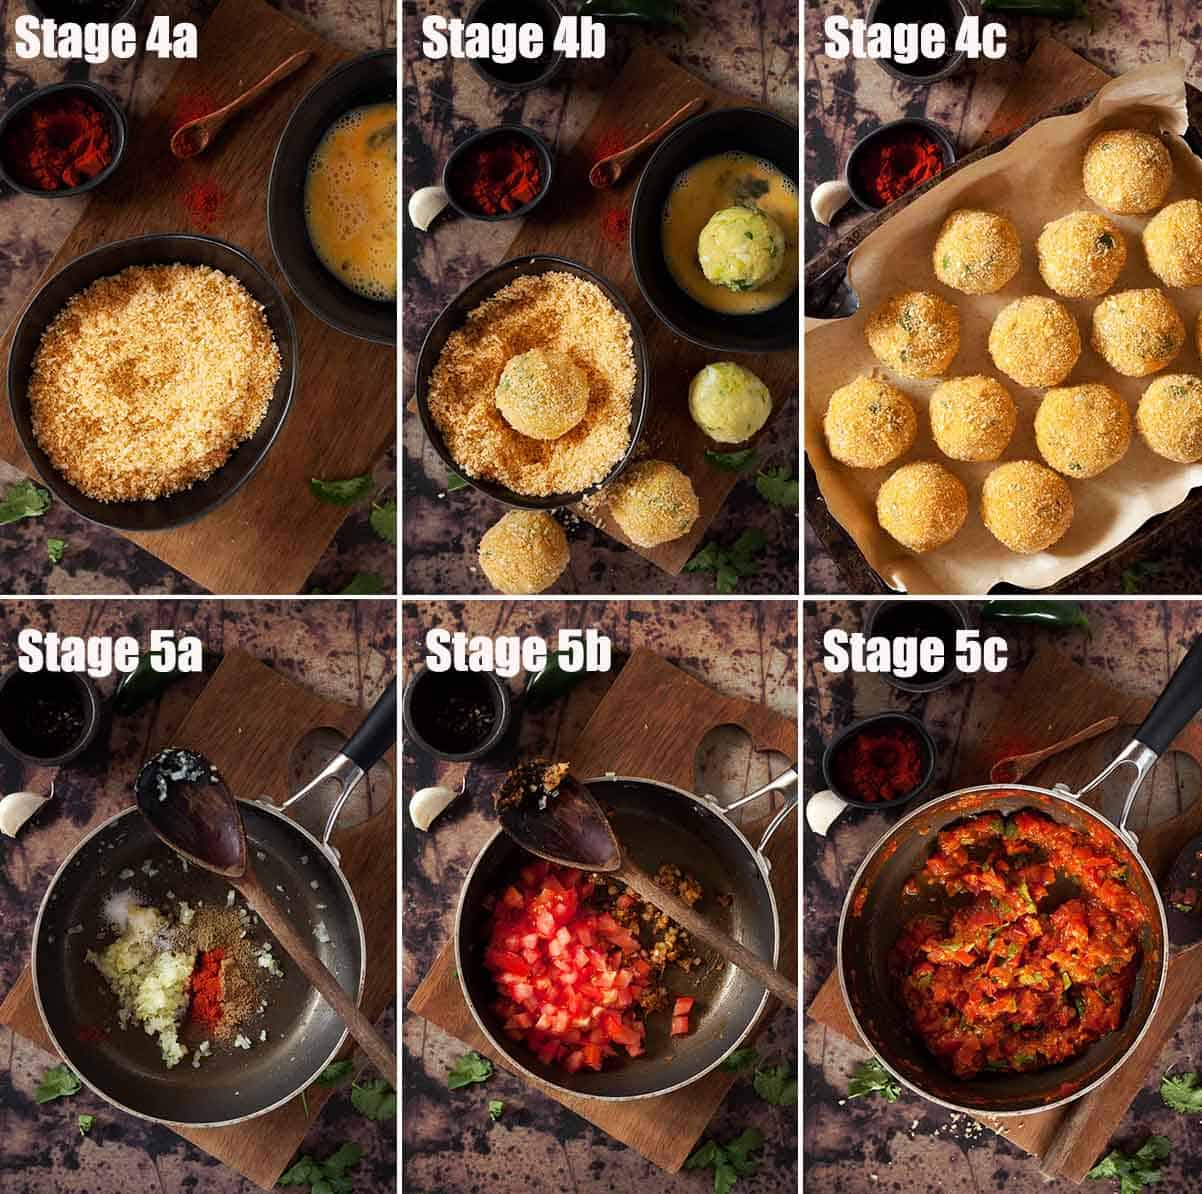 Collage of images showing potato balls and tomato sauce being made.